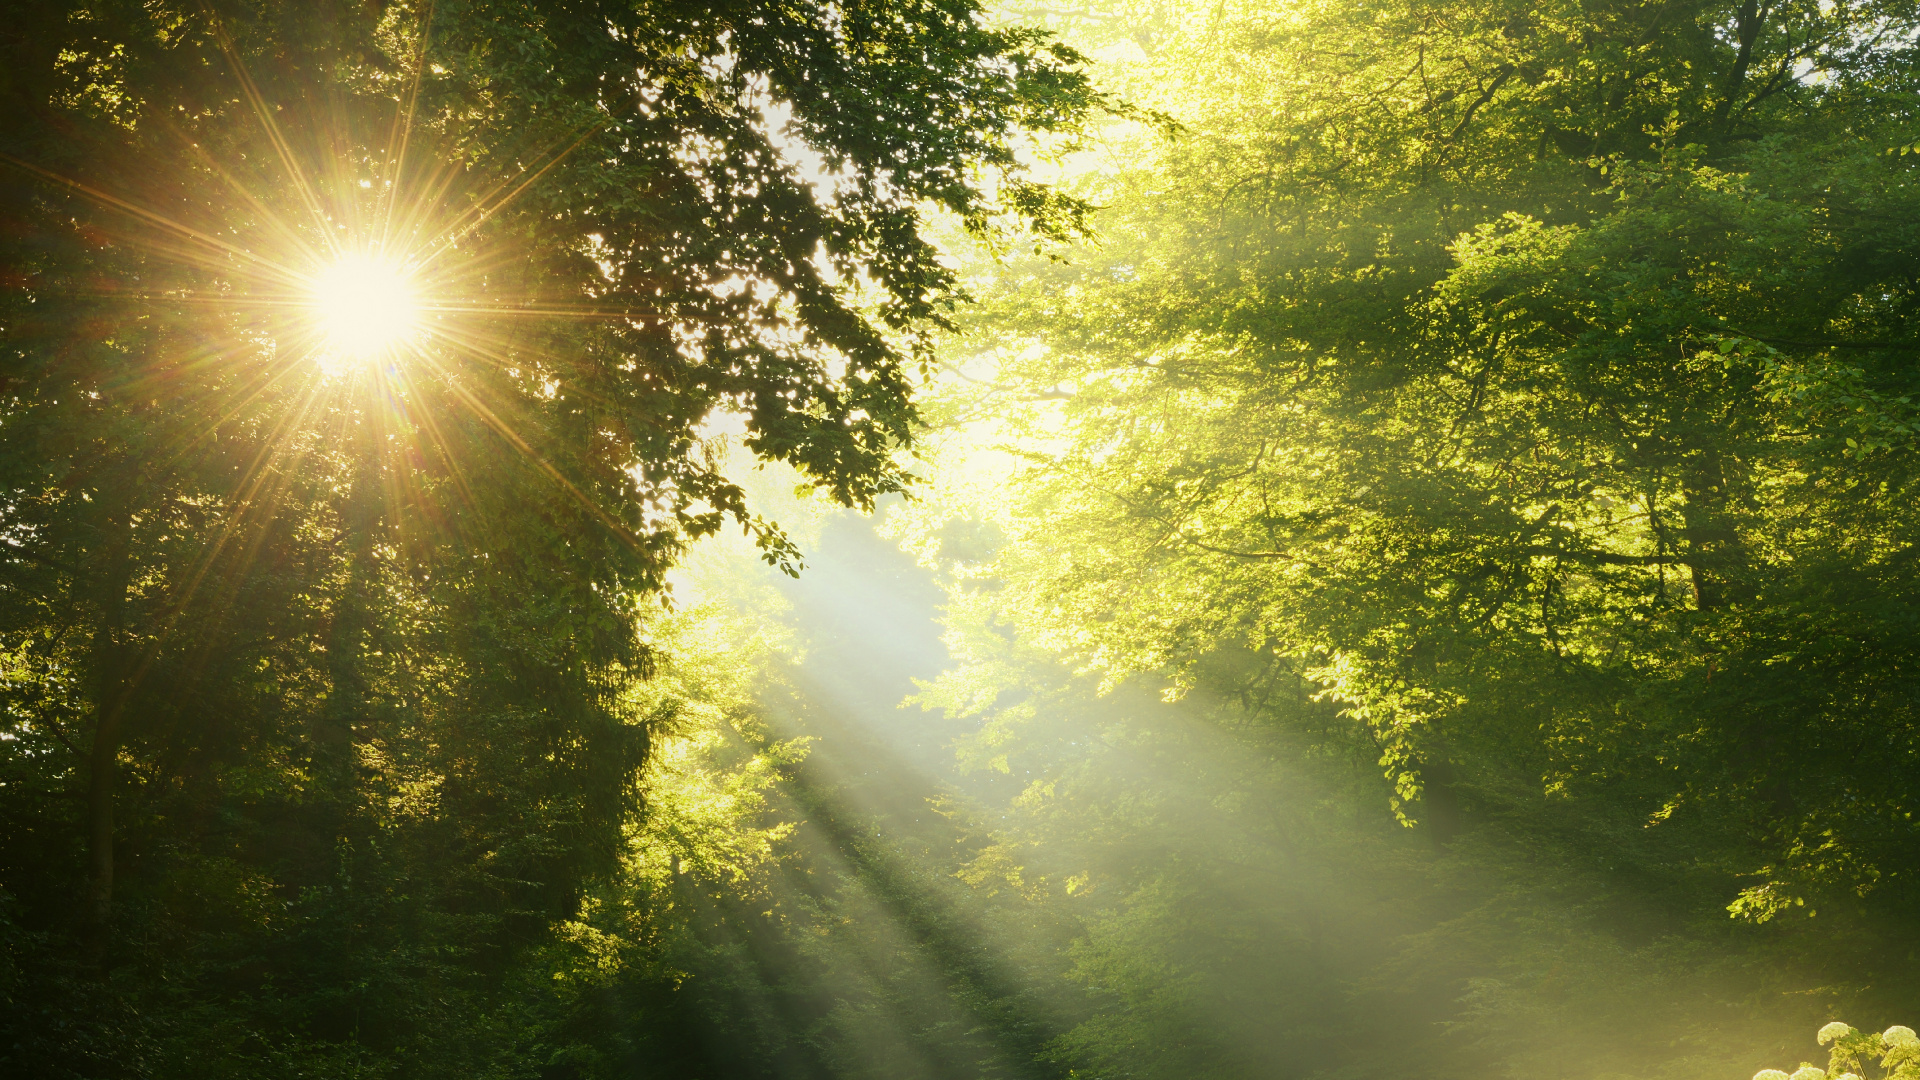 Sun Rays Coming Through Green Trees. Wallpaper in 1920x1080 Resolution